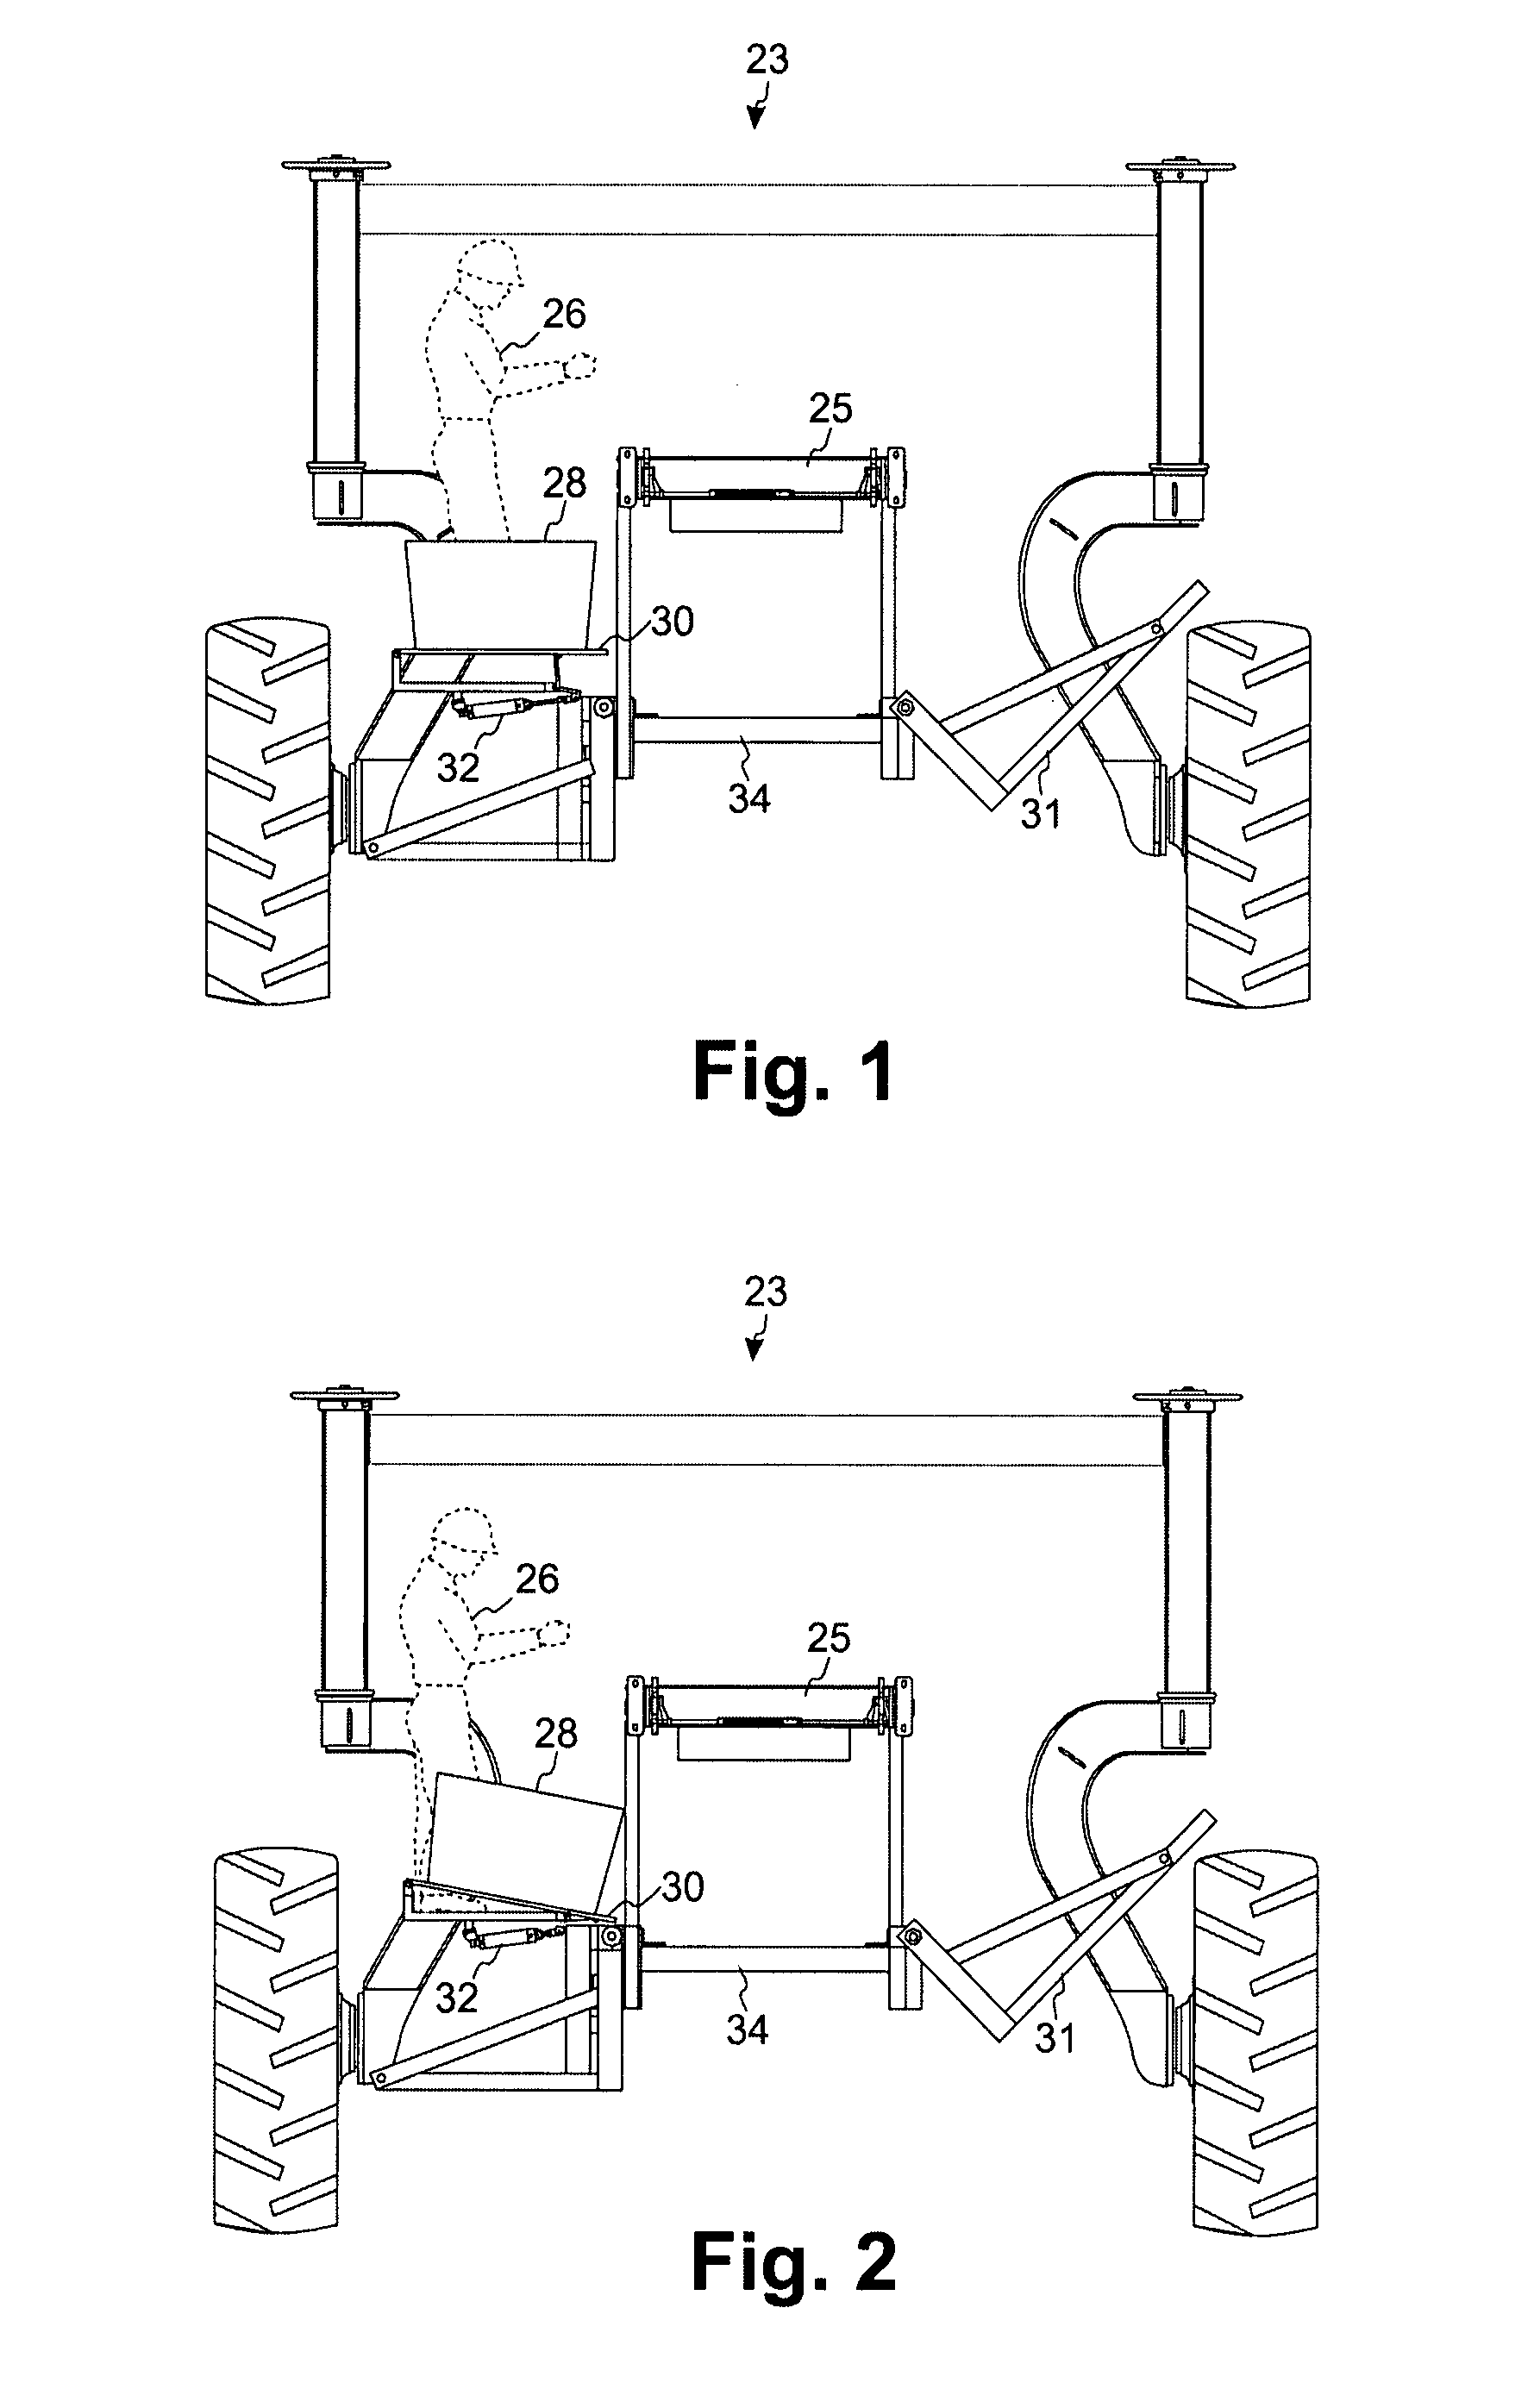 Combination bulk and tote loading harvesting apparatus and method